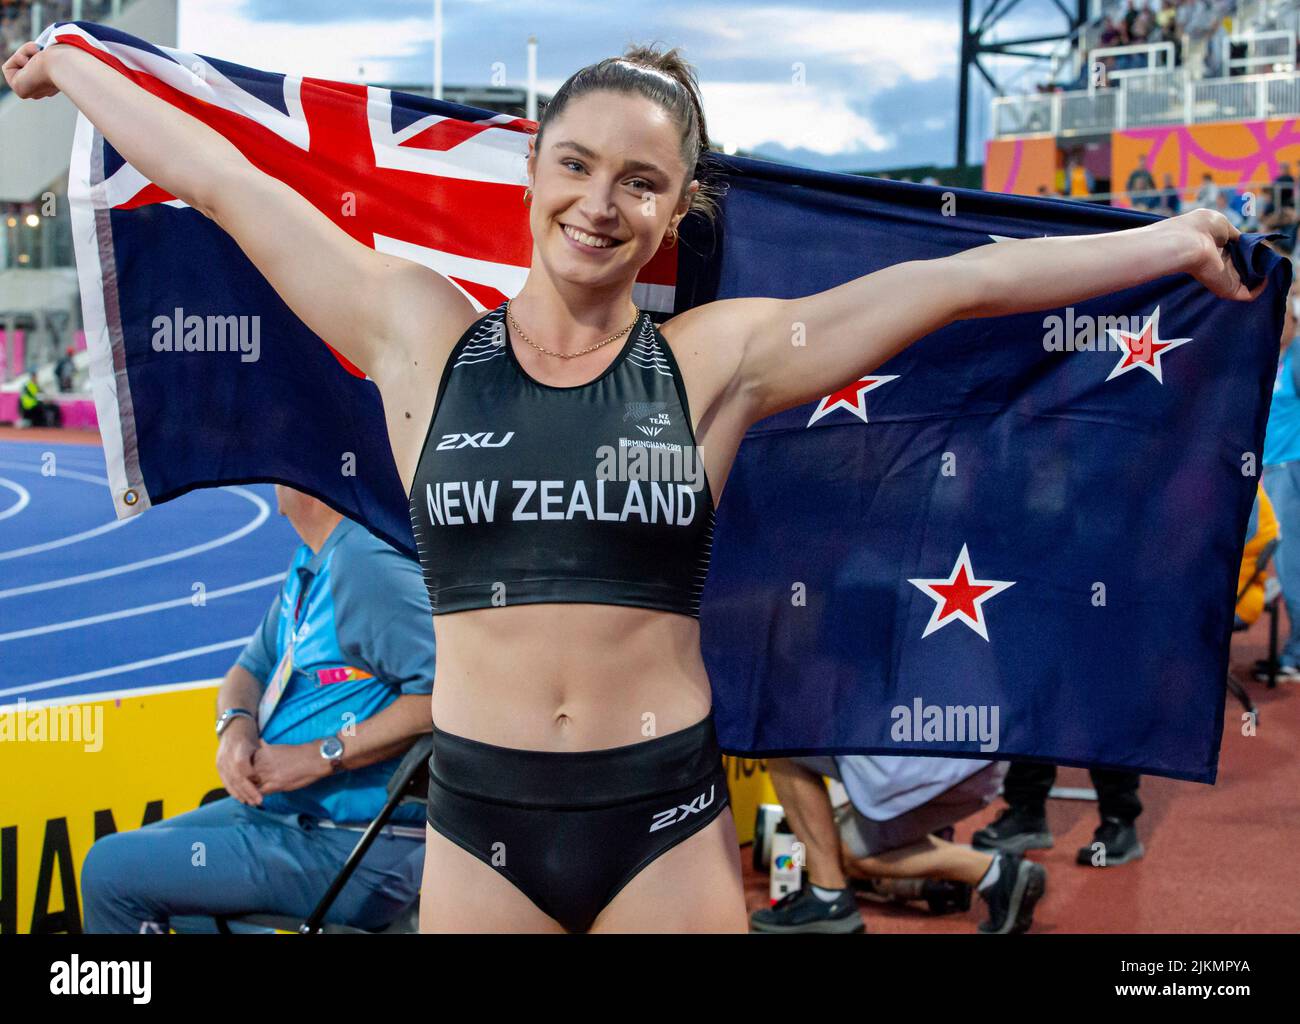 Birmingham, UK. 2nd August 2022; Alexander Stadium, Birmingham, Midlands, England: Day 5 of the 2022 Commonwealth Games: Imogen Ayris (NZL) with her national flag celebrates after winning the Bronze Medal in the Pole Vault with a height of 4.45m Credit: Action Plus Sports Images/Alamy Live News Stock Photo